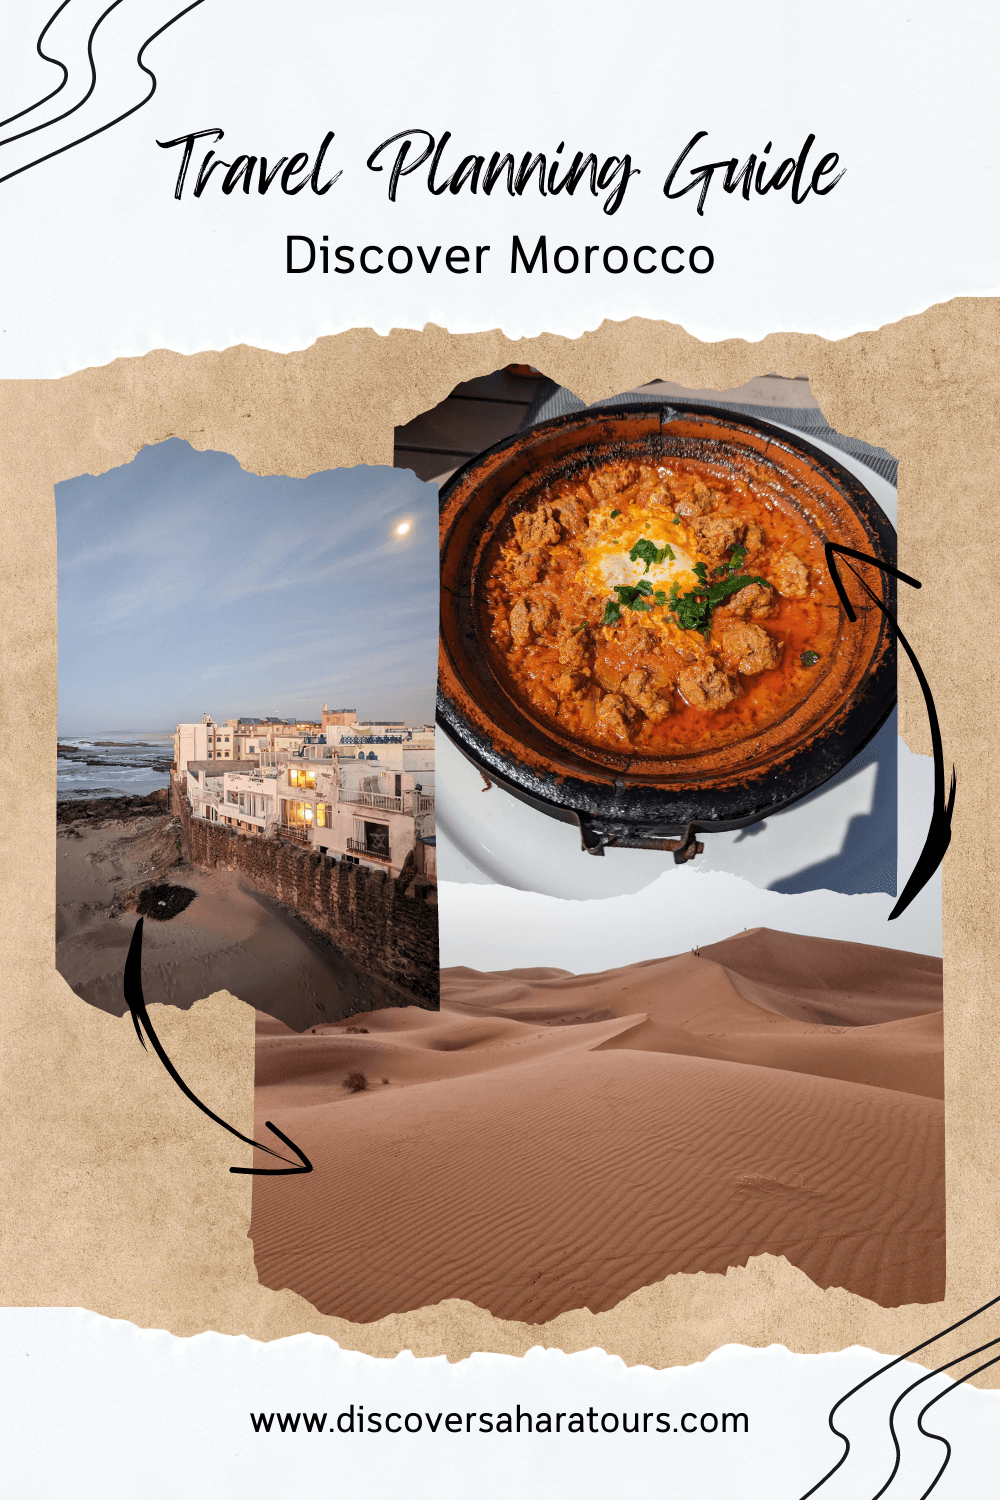 Pin for Pinterest: Travel Planning Guide - Discover Morocco